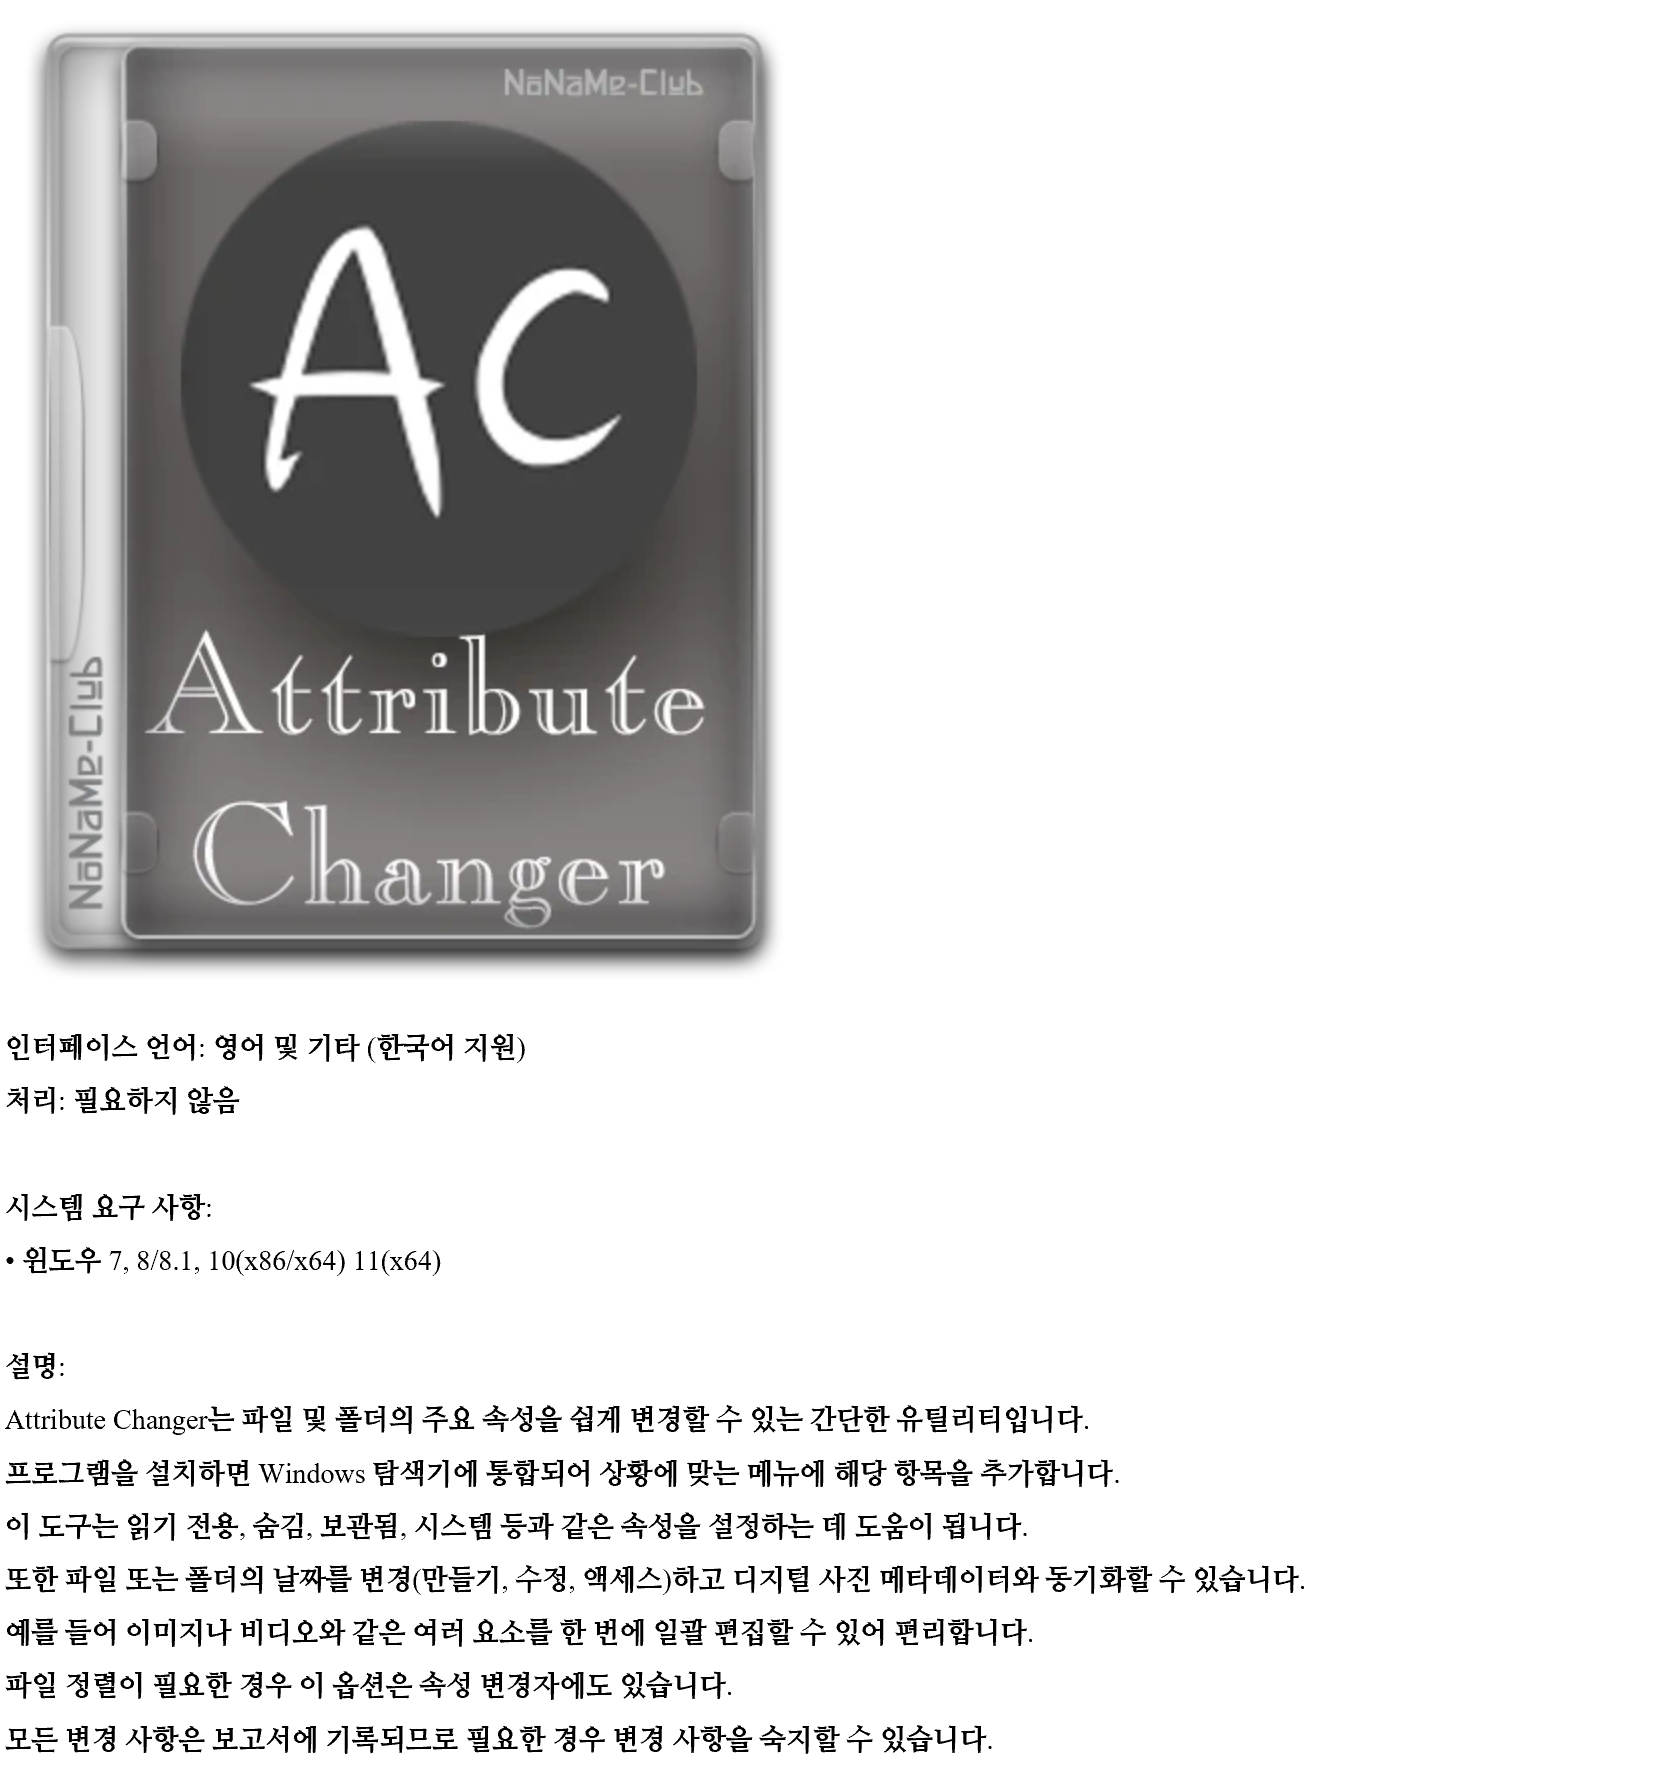 Attribute Changer 11.20b instal the new version for apple